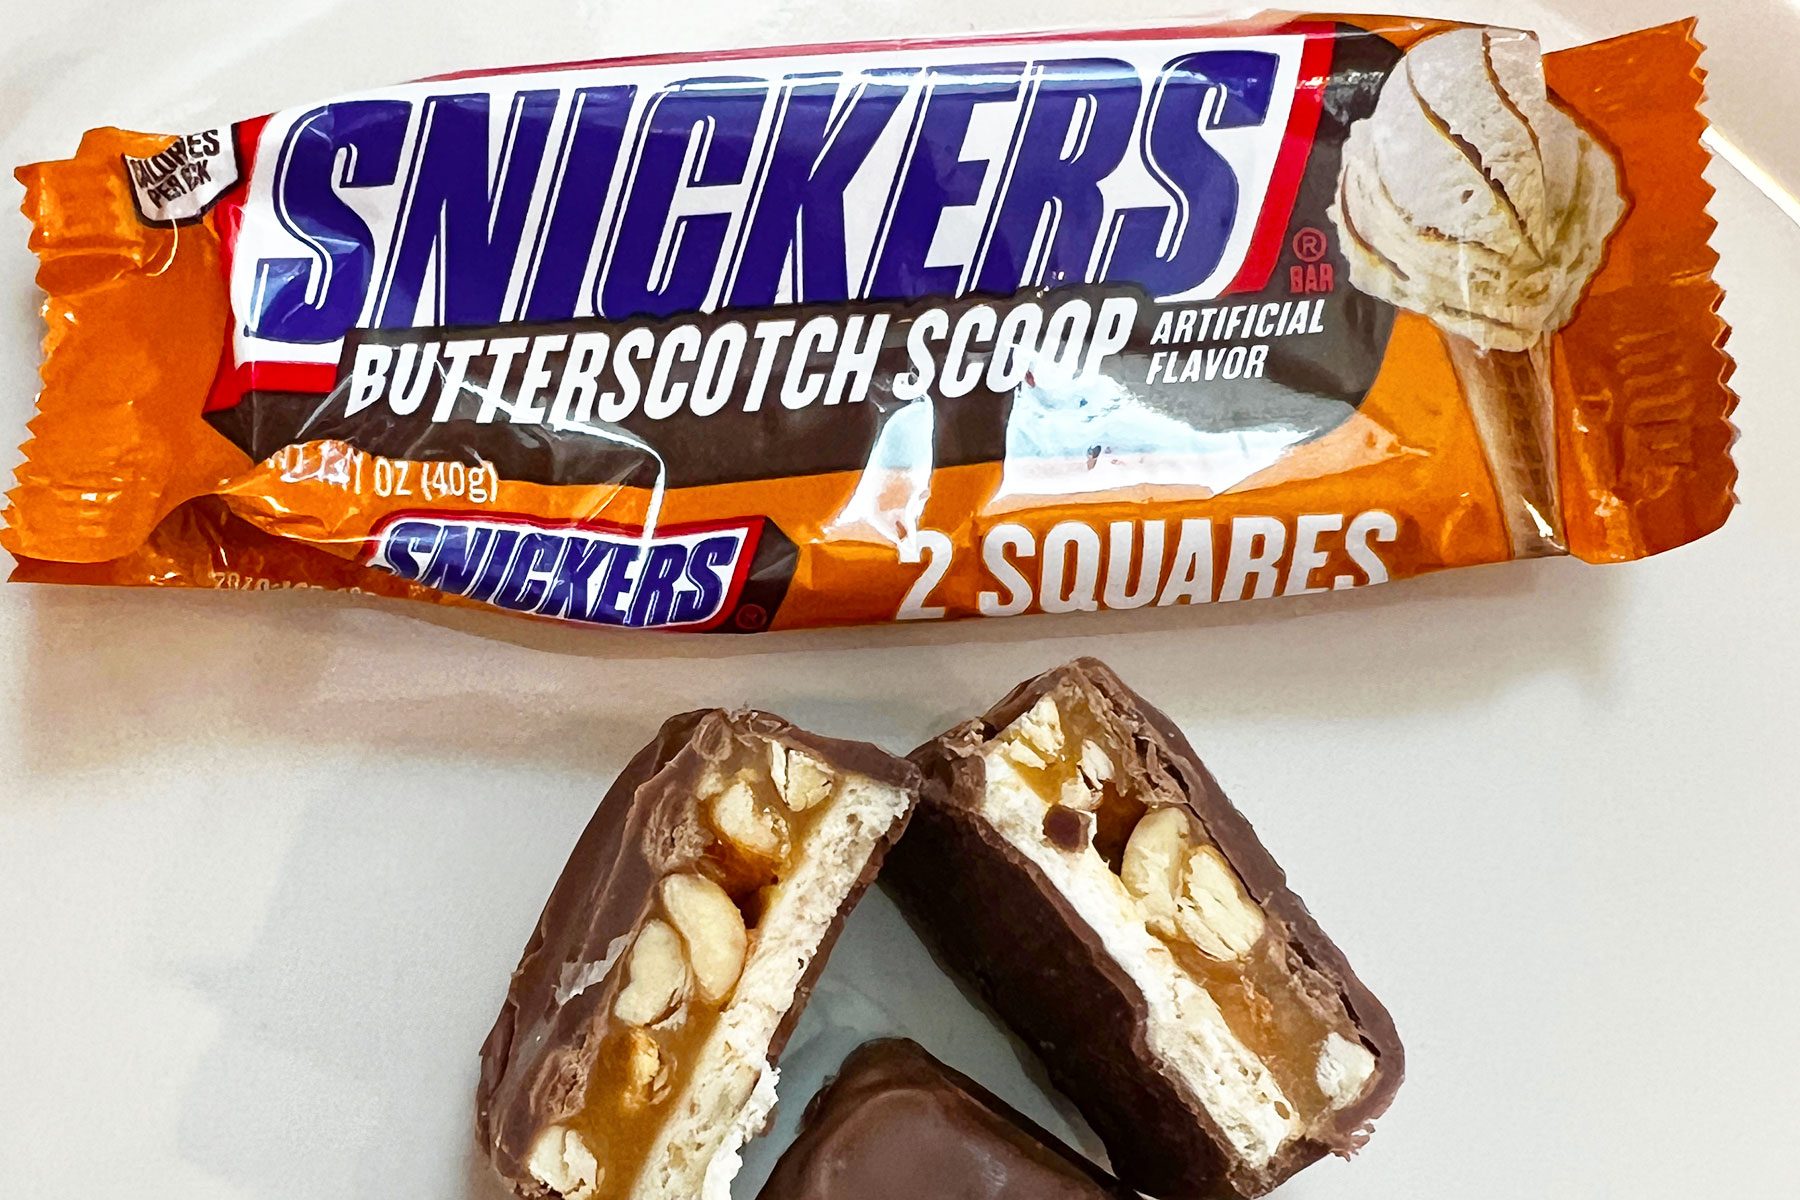 Snickers Butterscotch Scoop: New Snickers Flavor Review